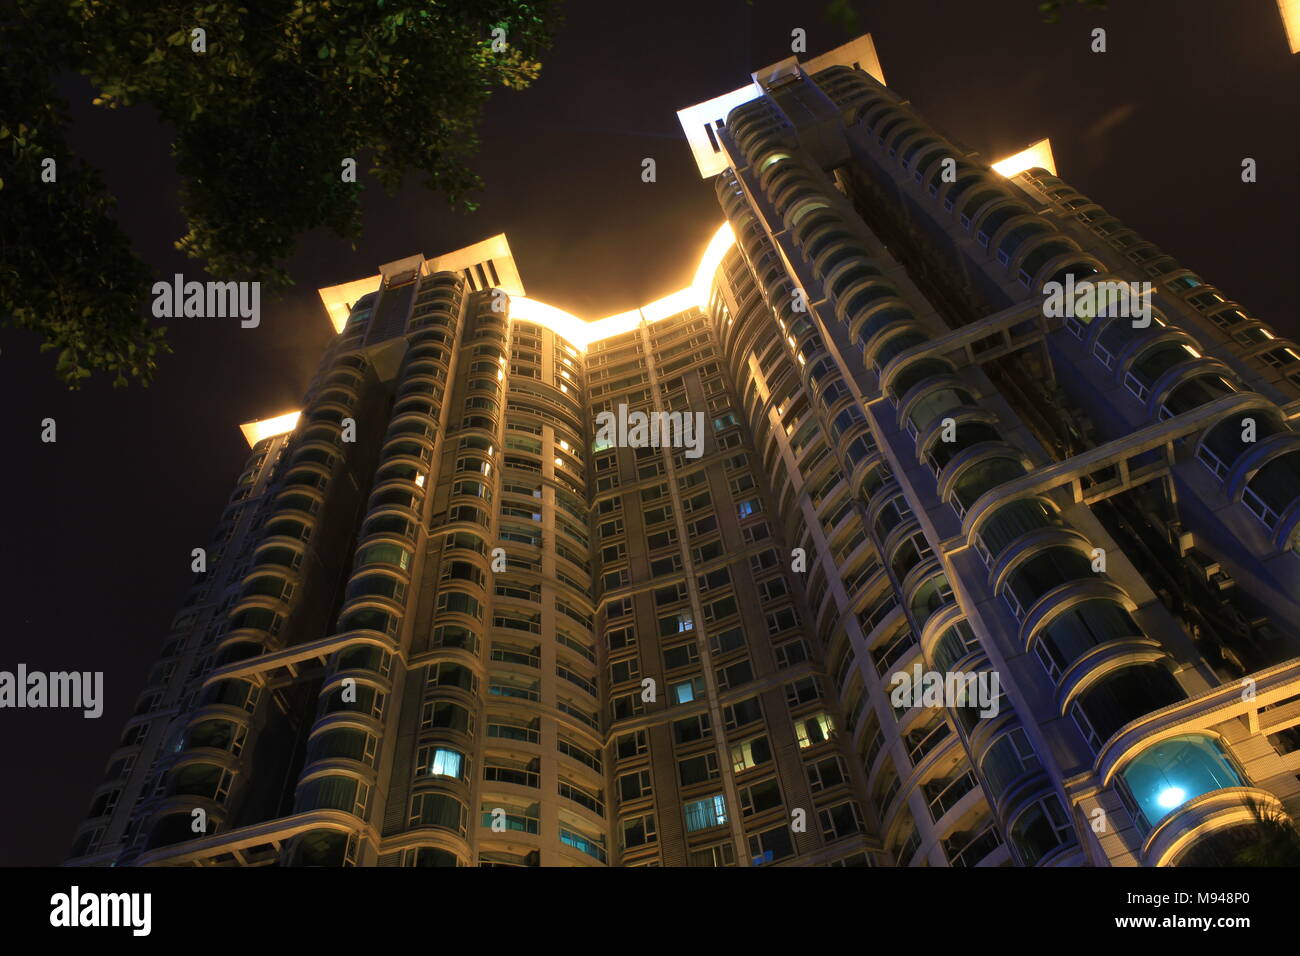 Luxury apartment build photographed at night in Guangzhou China Stock Photo